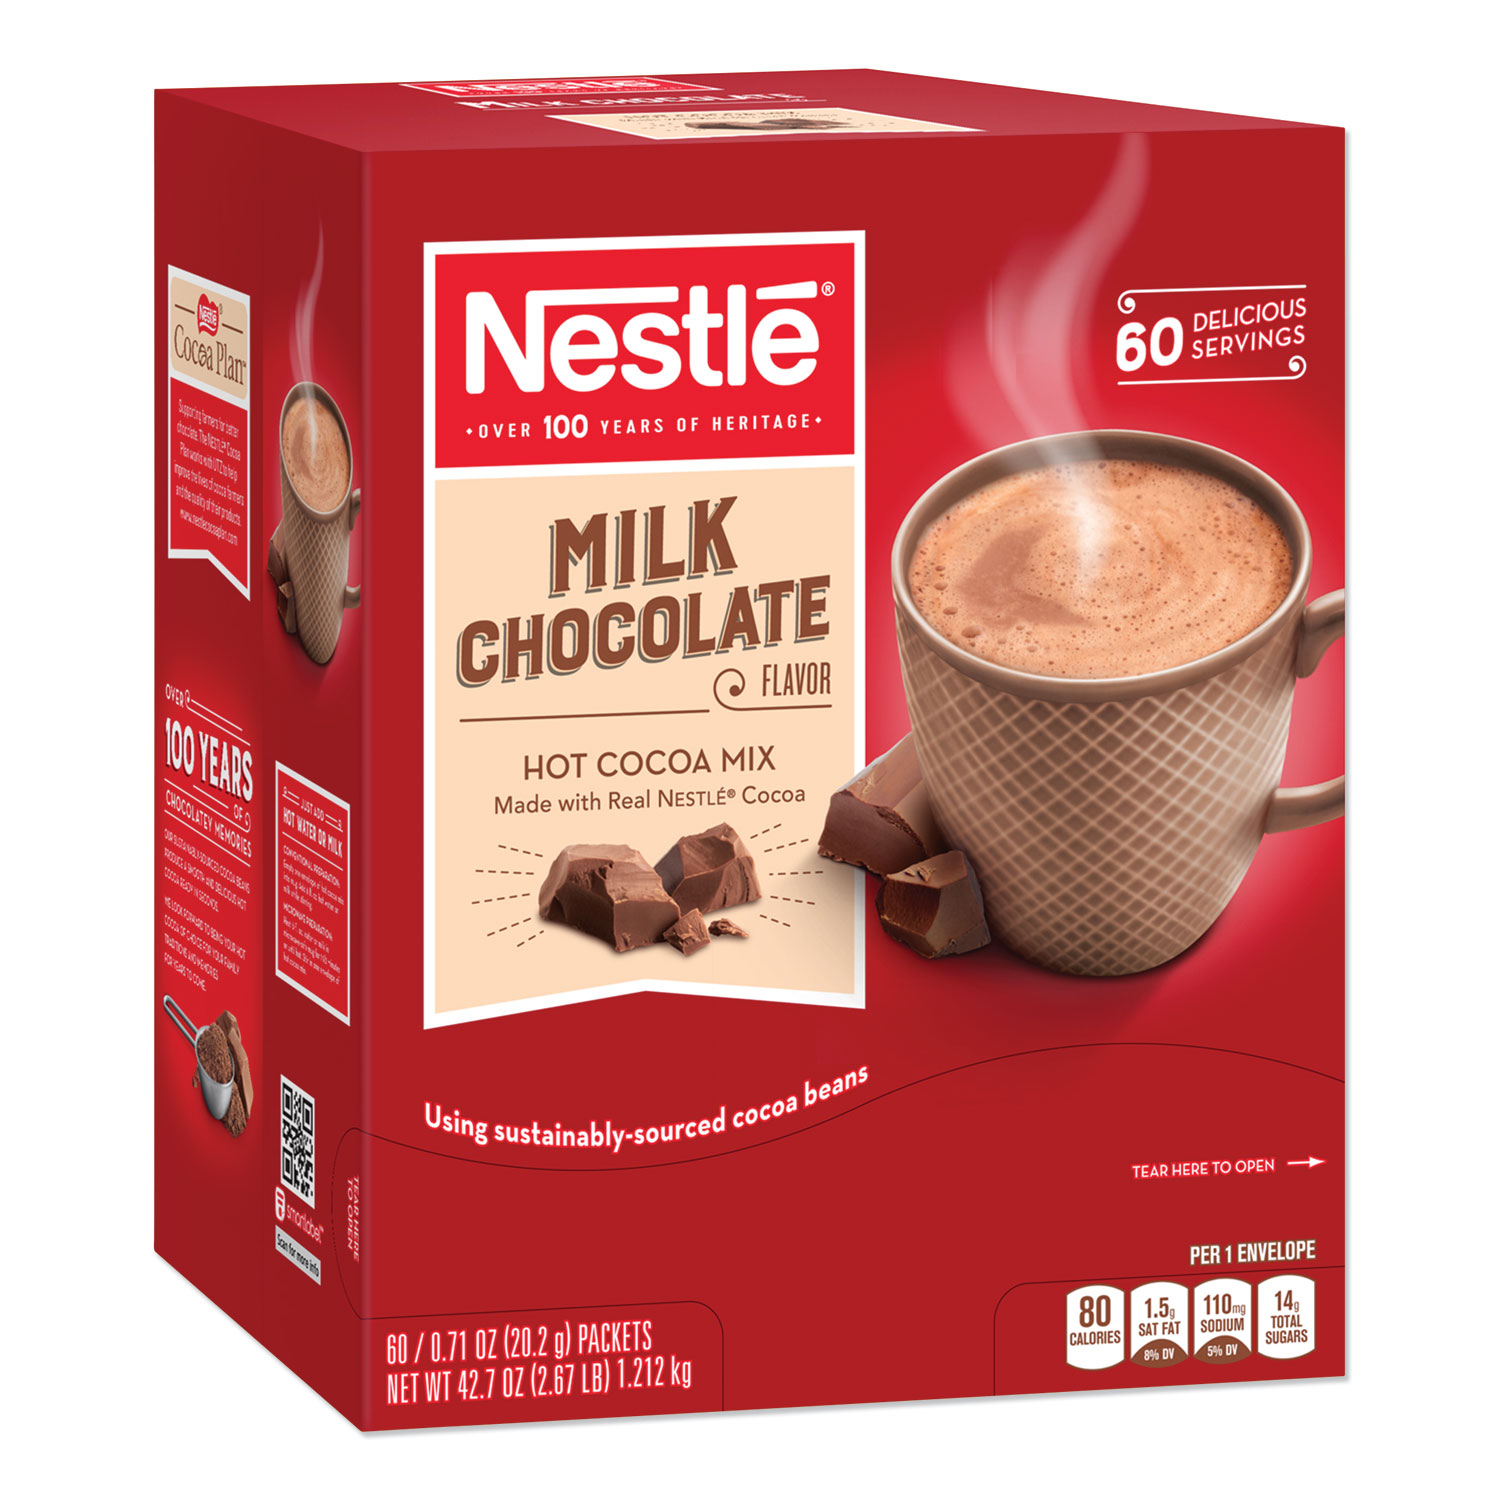 Nestlé NES26791 Hot Cocoa Mix, Milk Chocolate, 0.71 oz Packet, 60 Packets/B...